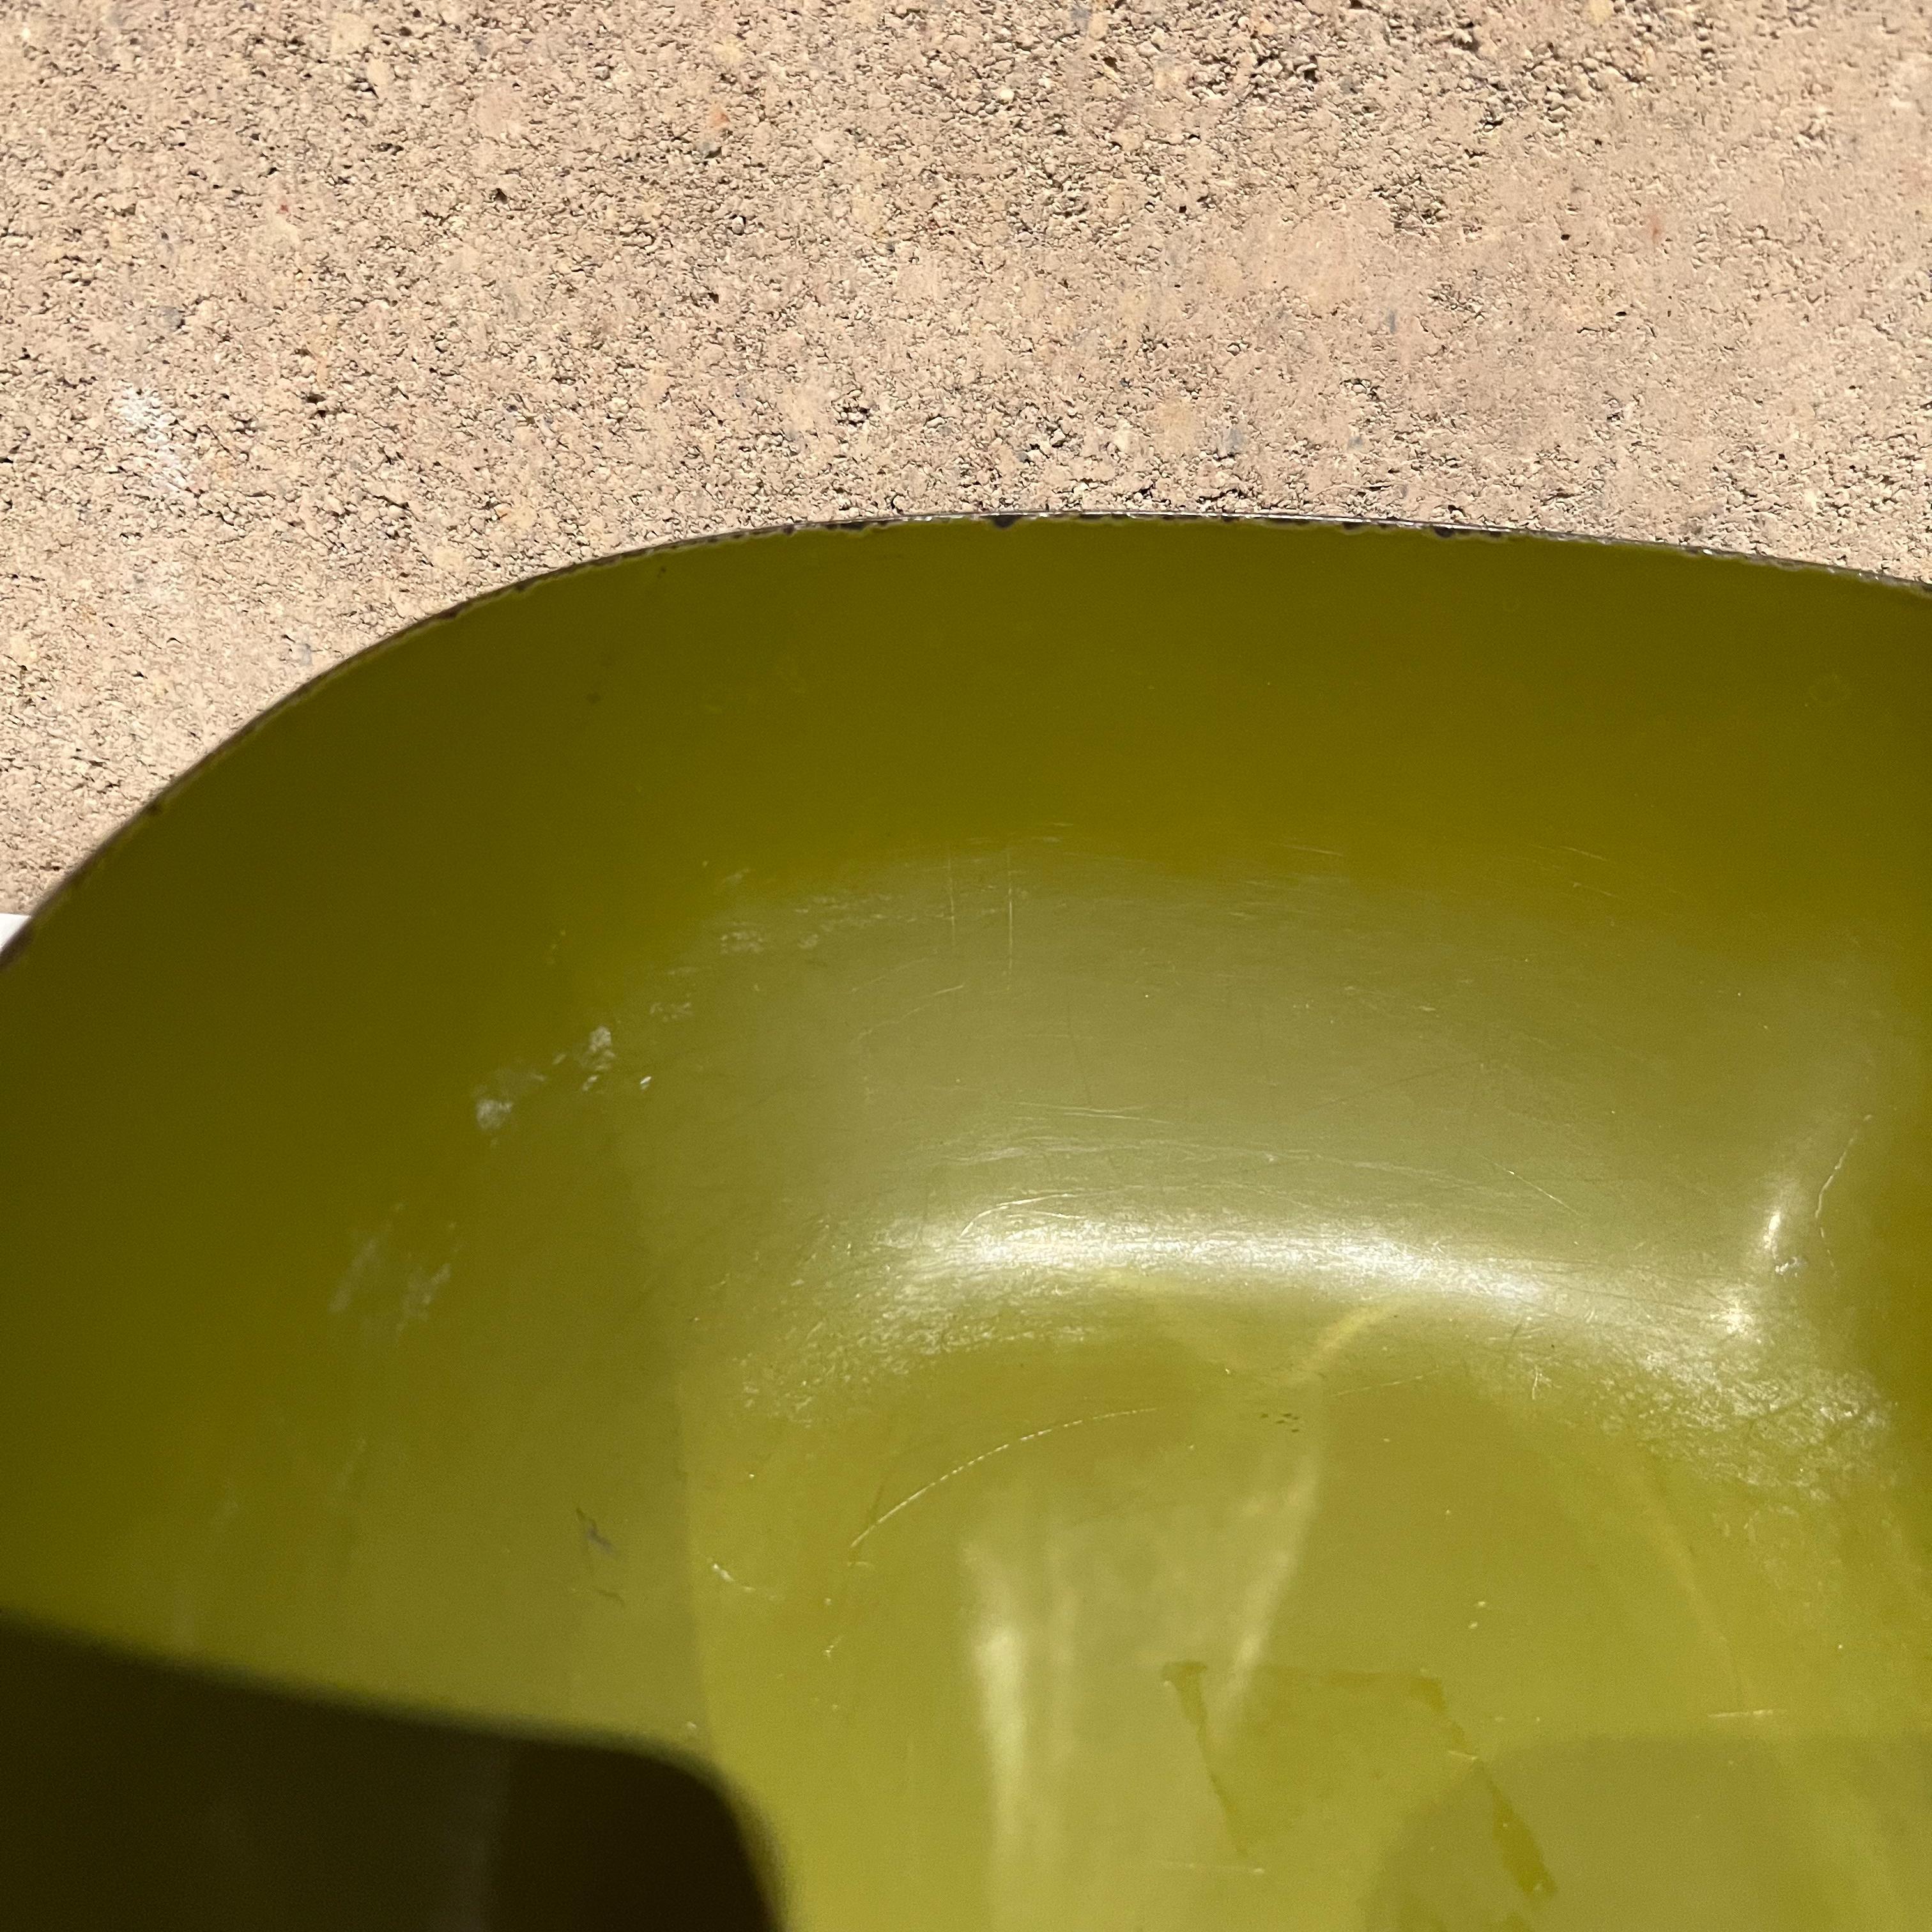 Vintage Avocado Green Enamelware Bowl 1960s Modern Cathrineholm of Holland In Good Condition For Sale In Chula Vista, CA